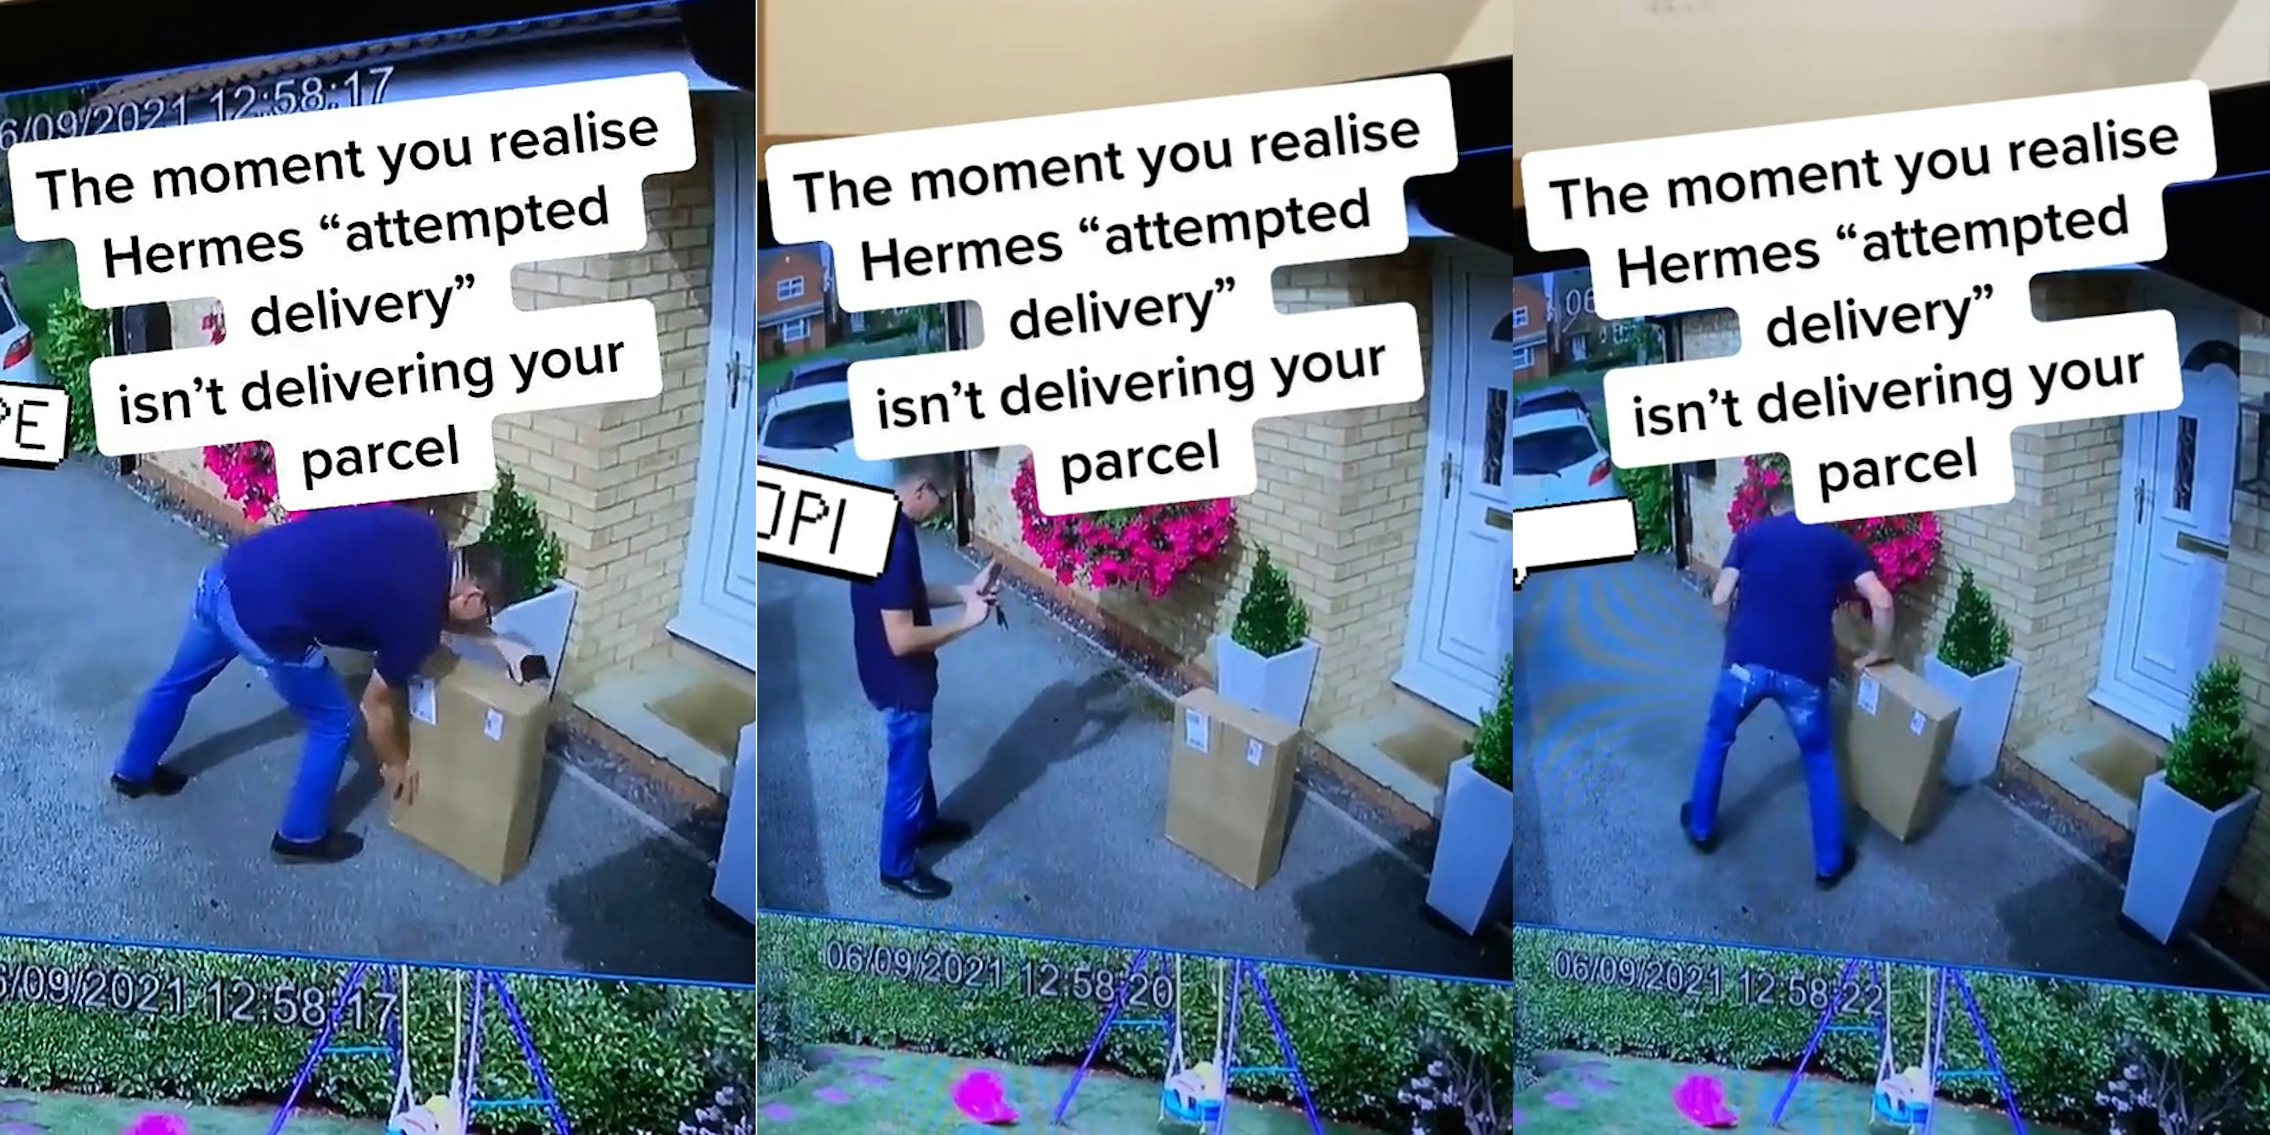 security camera footage of delivery driver placing package next to front step caption 'The moment you realize Hermes 'attempted delivery' isn't delivering your parcel' (l)security camera footage delivery driver taking photo of delivered package caption 'The moment you realize Hermes 'attempted delivery' isn't delivering your parcel' (c) security camera footage delivery driver taking package caption 'The moment you realize Hermes 'attempted delivery' isn't delivering your parcel' (r)